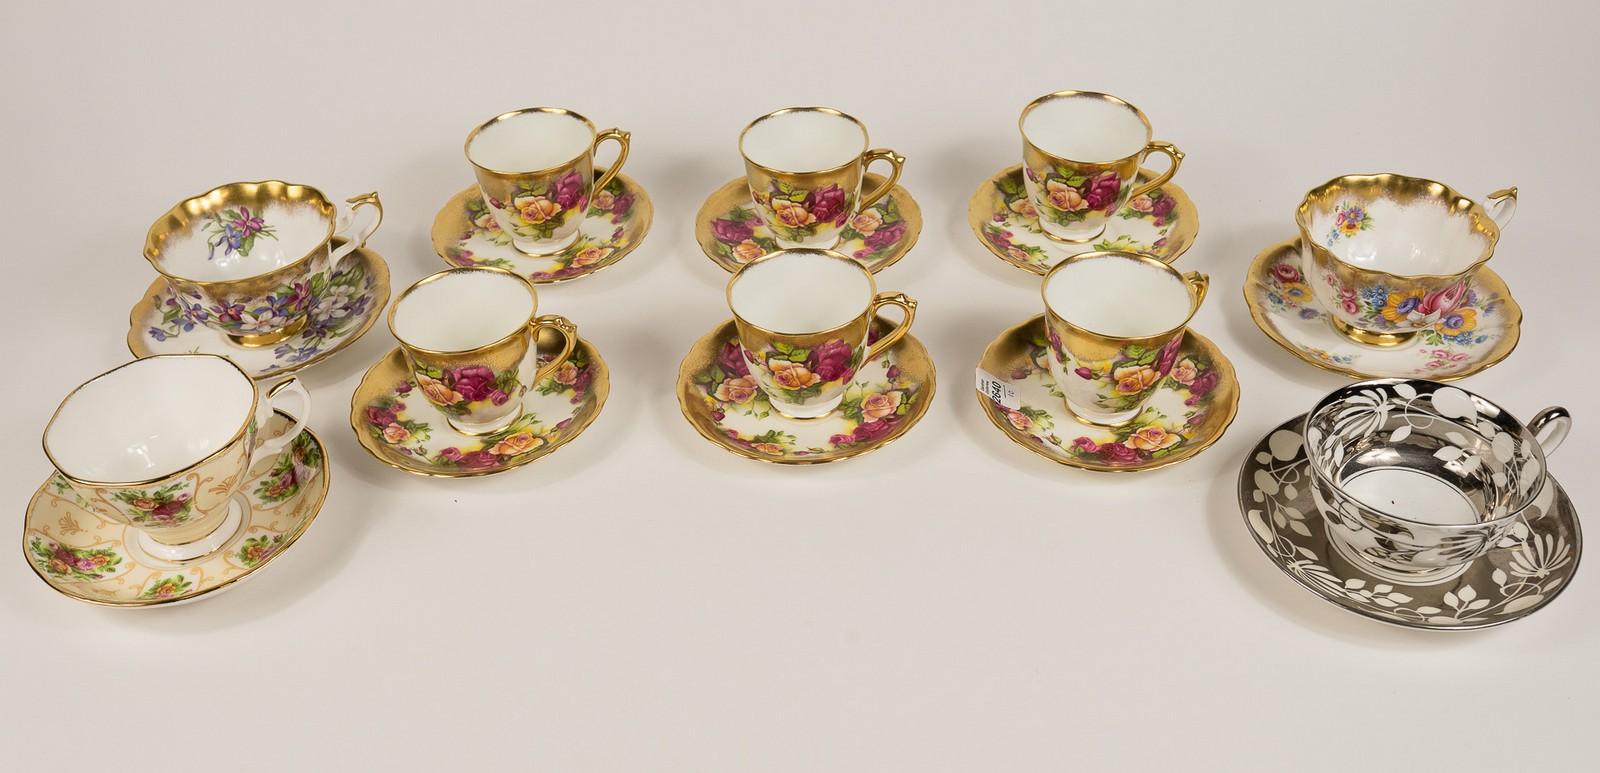 10 ENGLISH CUPS & SAUCERS